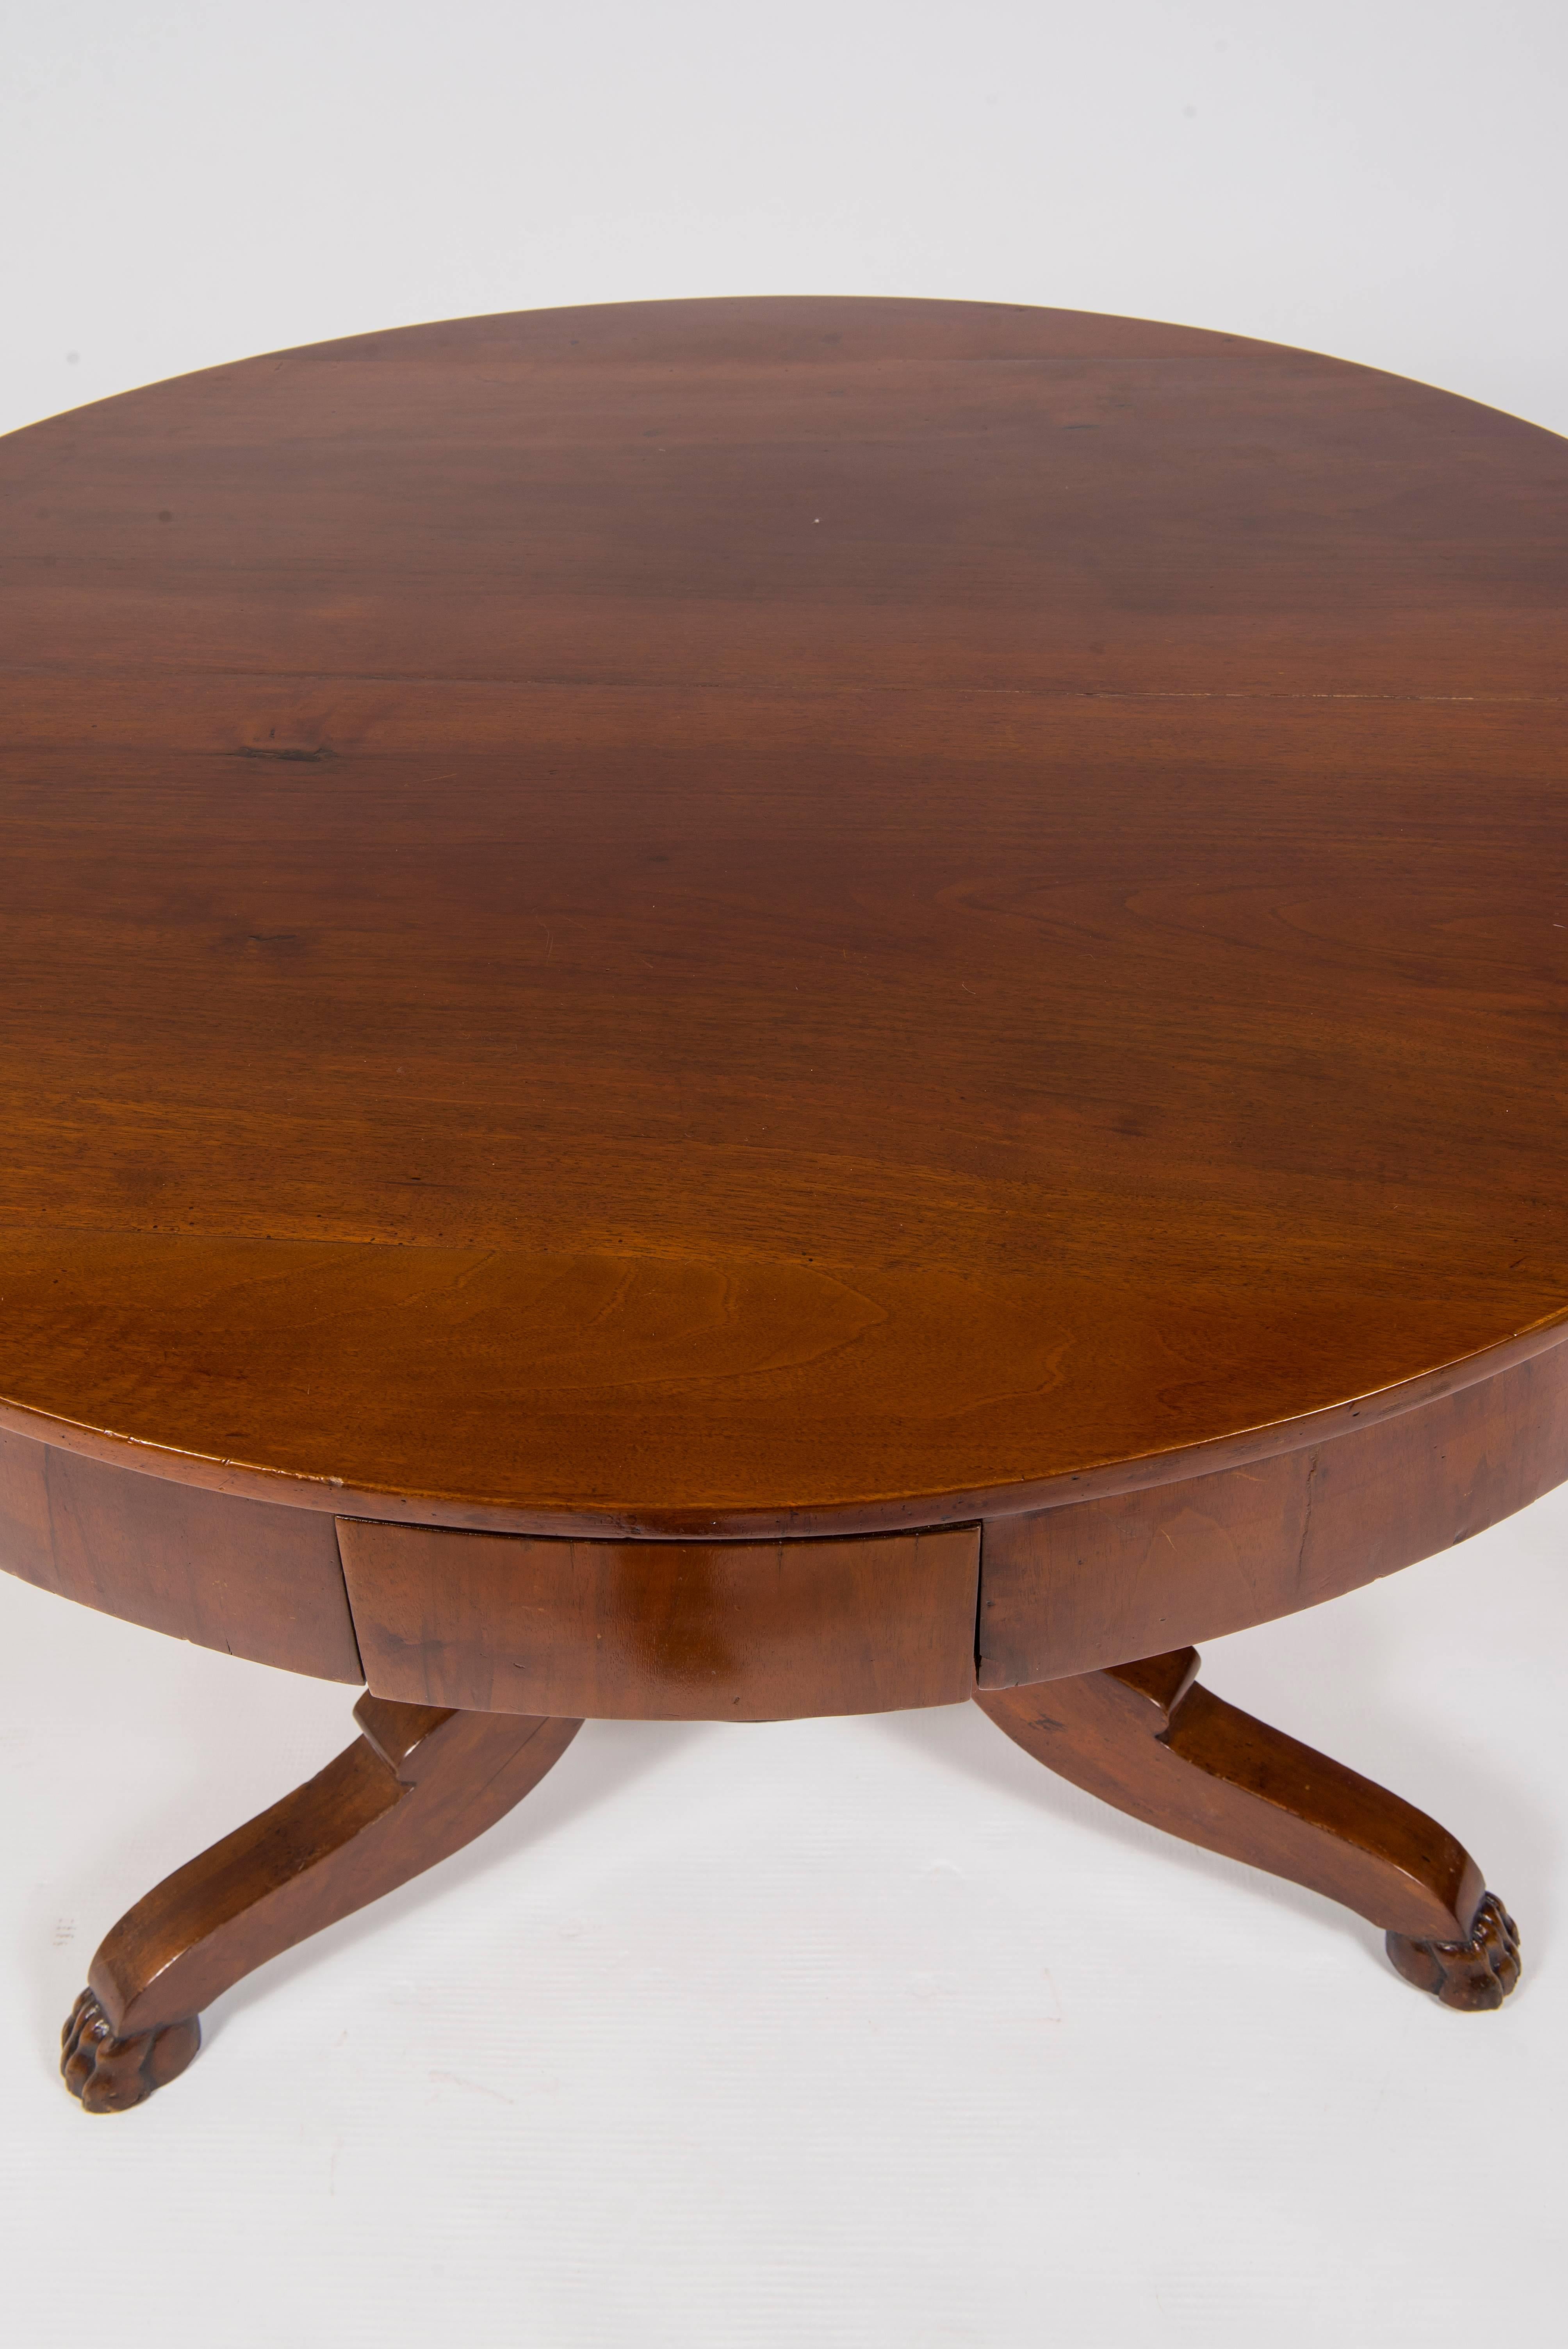 An Italian Empire walnut centre table featuring two drawers, three legged pedestal base and classically carved lion's paws, circa 1815.